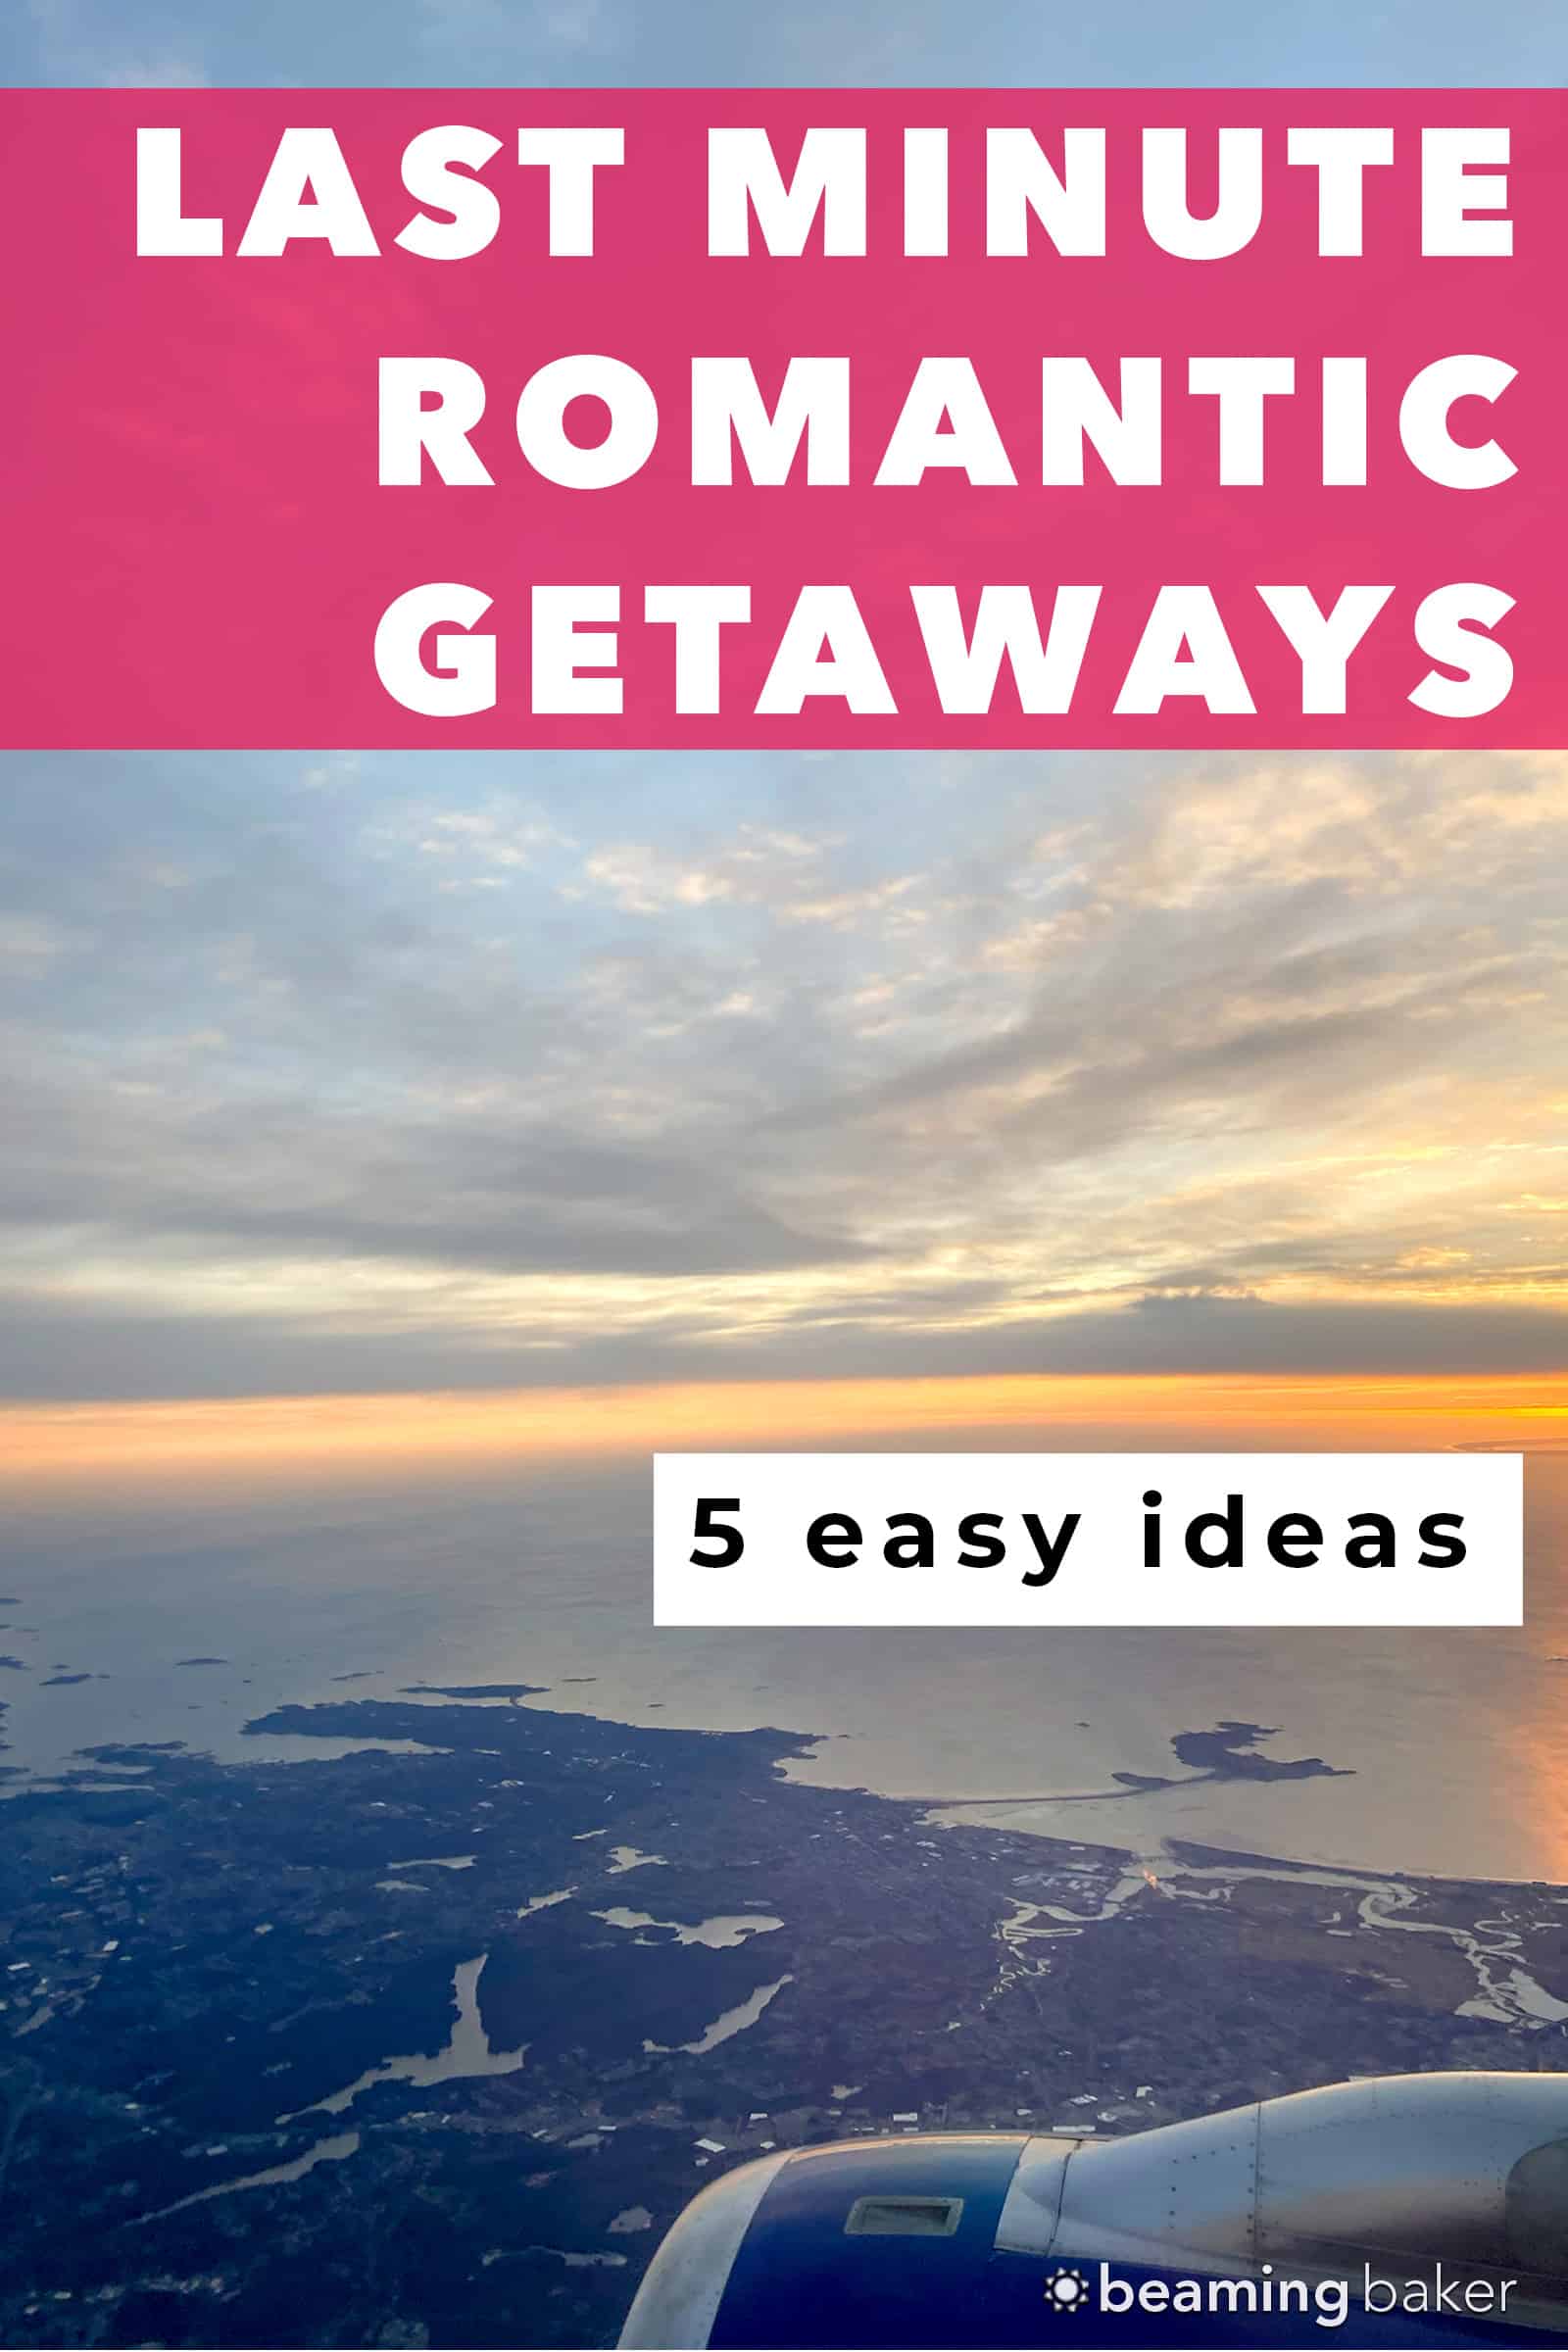 5 Last Minute Last Minute Romantic Getaway Ideas: Spice up your love life with these last minute couple getaways! Including cheap last minute weekend getaways for couples and creative romantic getaway ideas your partner will love! #Travel #TravelTips #RomanticGetaways #TravelHacks | Post on BeamingBaker.com